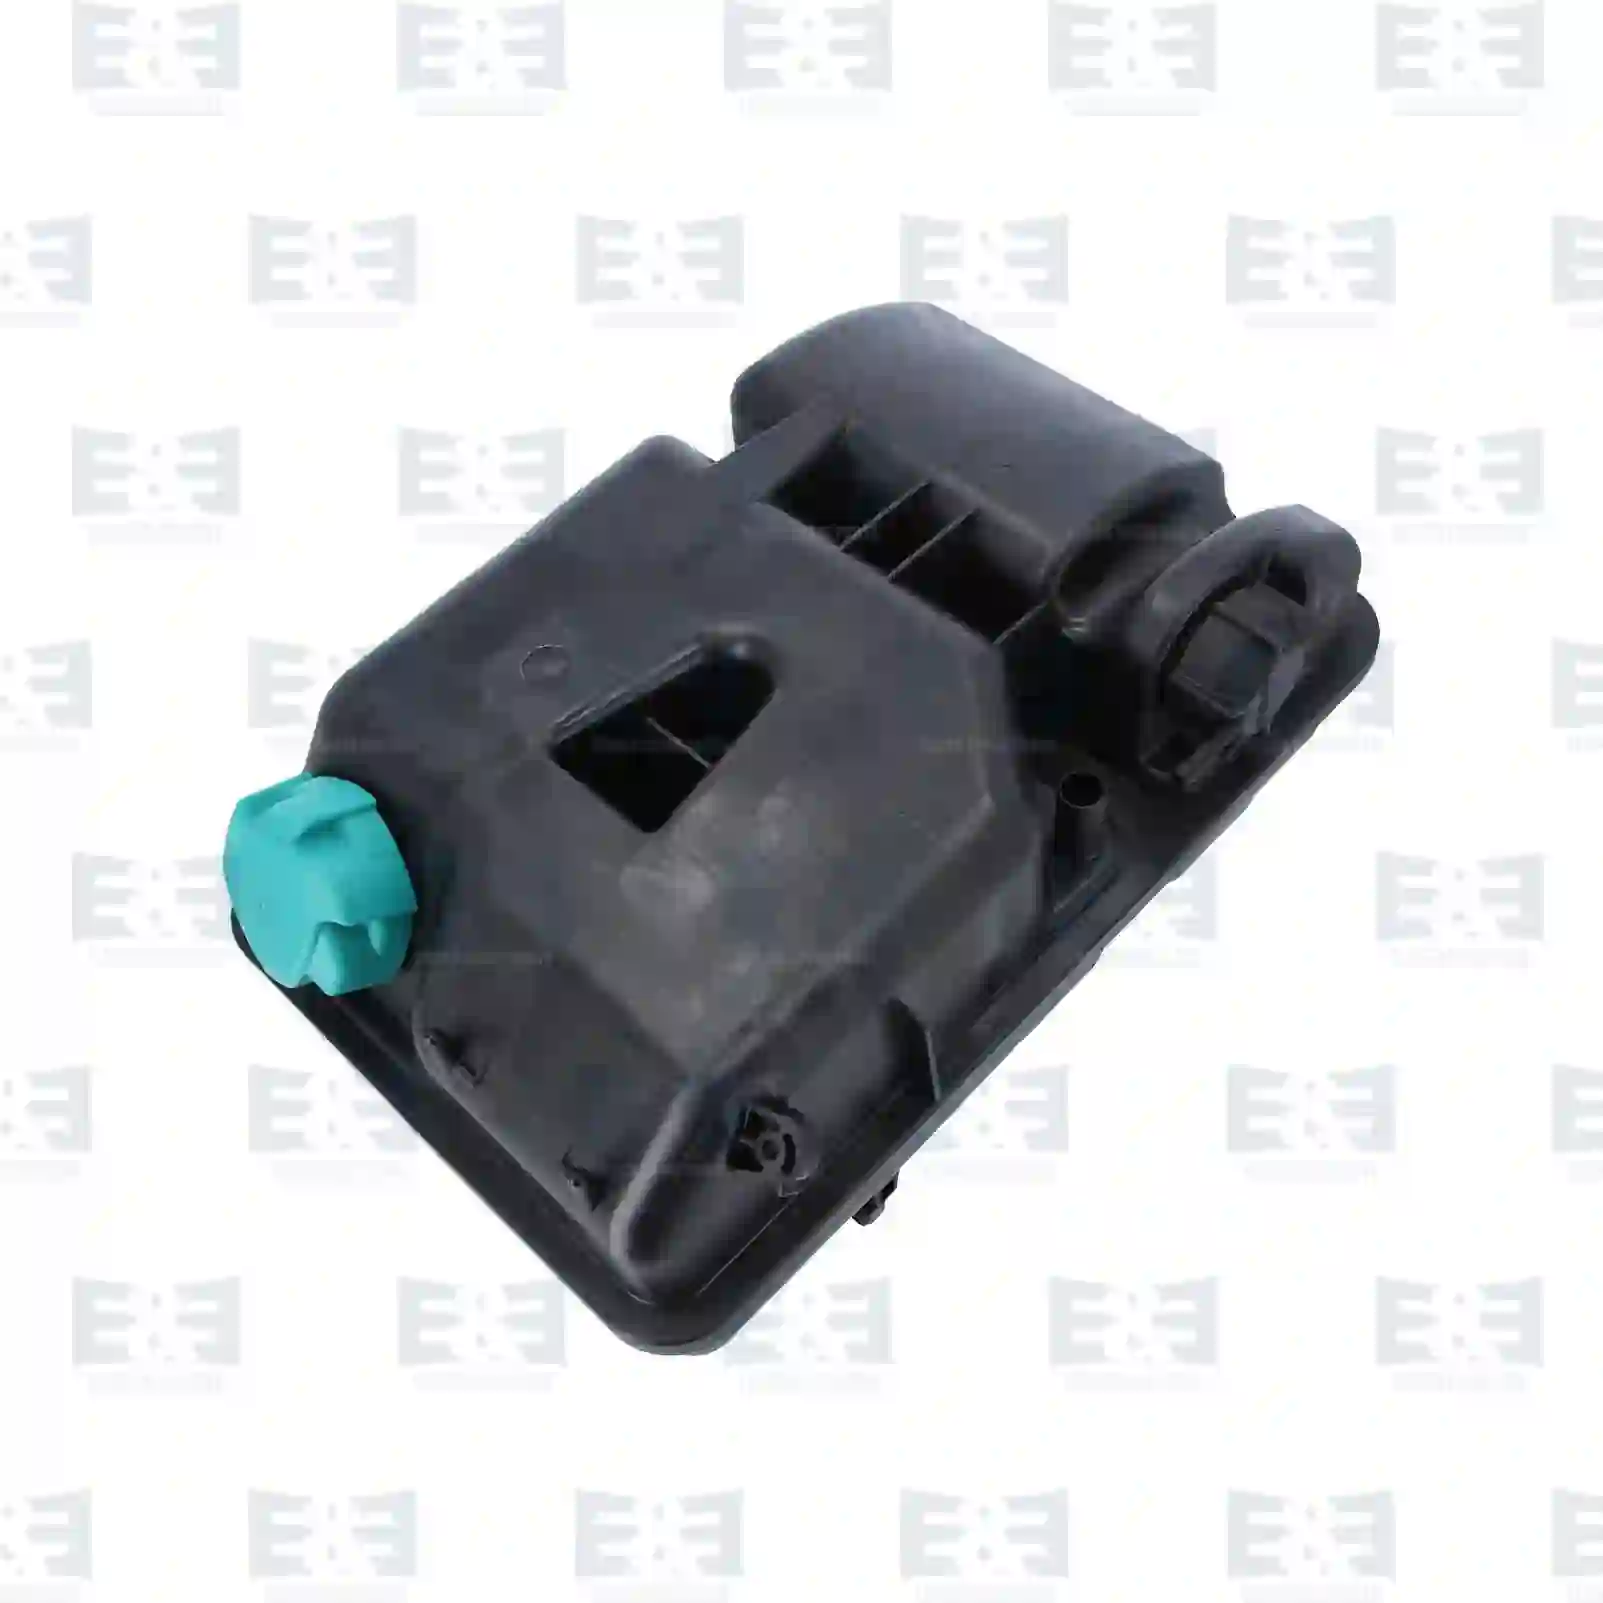 Expansion tank, with cover, without sensor, 2E2203280, 1960437 ||  2E2203280 E&E Truck Spare Parts | Truck Spare Parts, Auotomotive Spare Parts Expansion tank, with cover, without sensor, 2E2203280, 1960437 ||  2E2203280 E&E Truck Spare Parts | Truck Spare Parts, Auotomotive Spare Parts